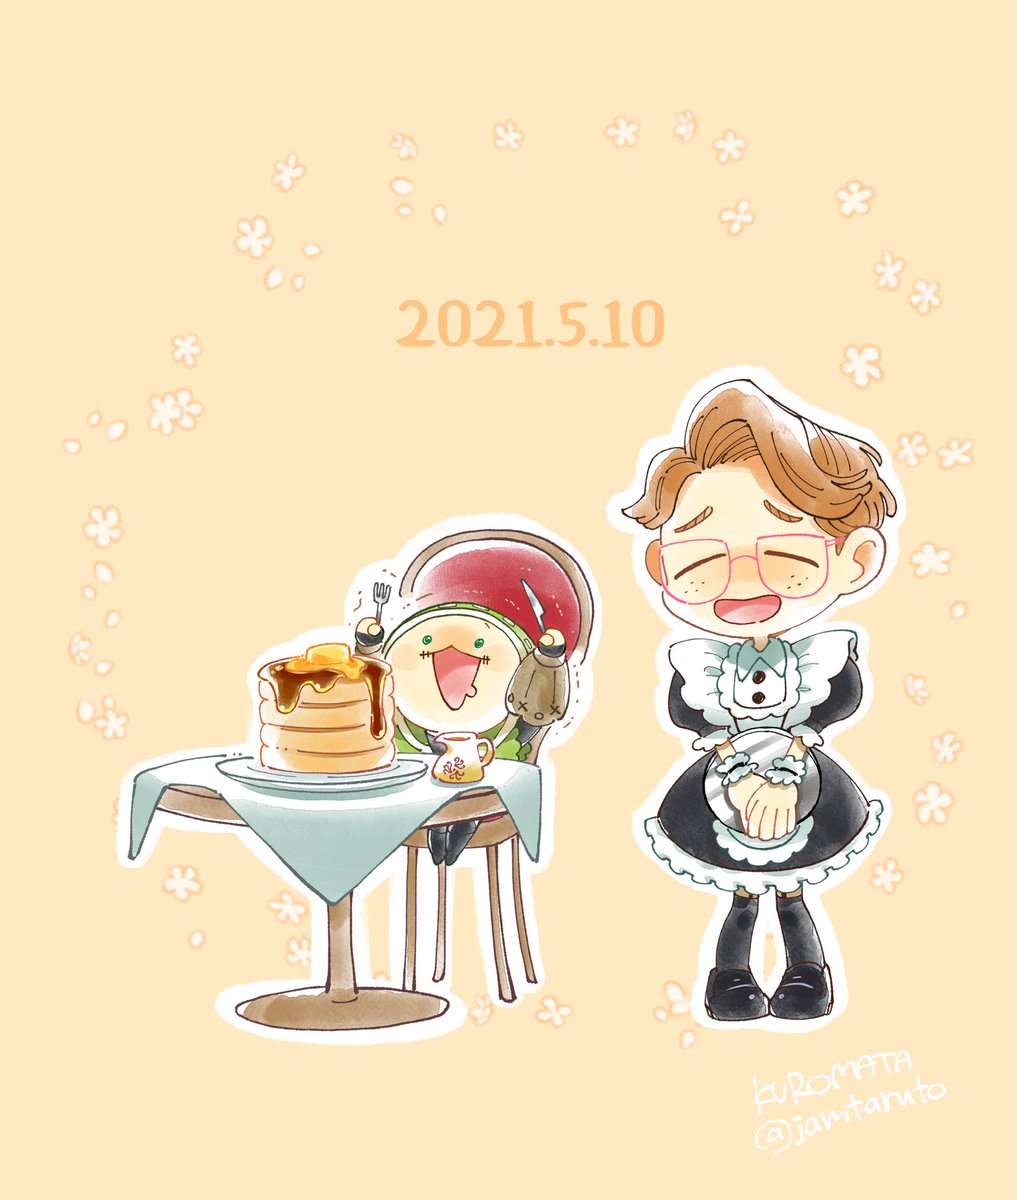 freckles pancake brown hair maid glasses closed eyes table  illustration images